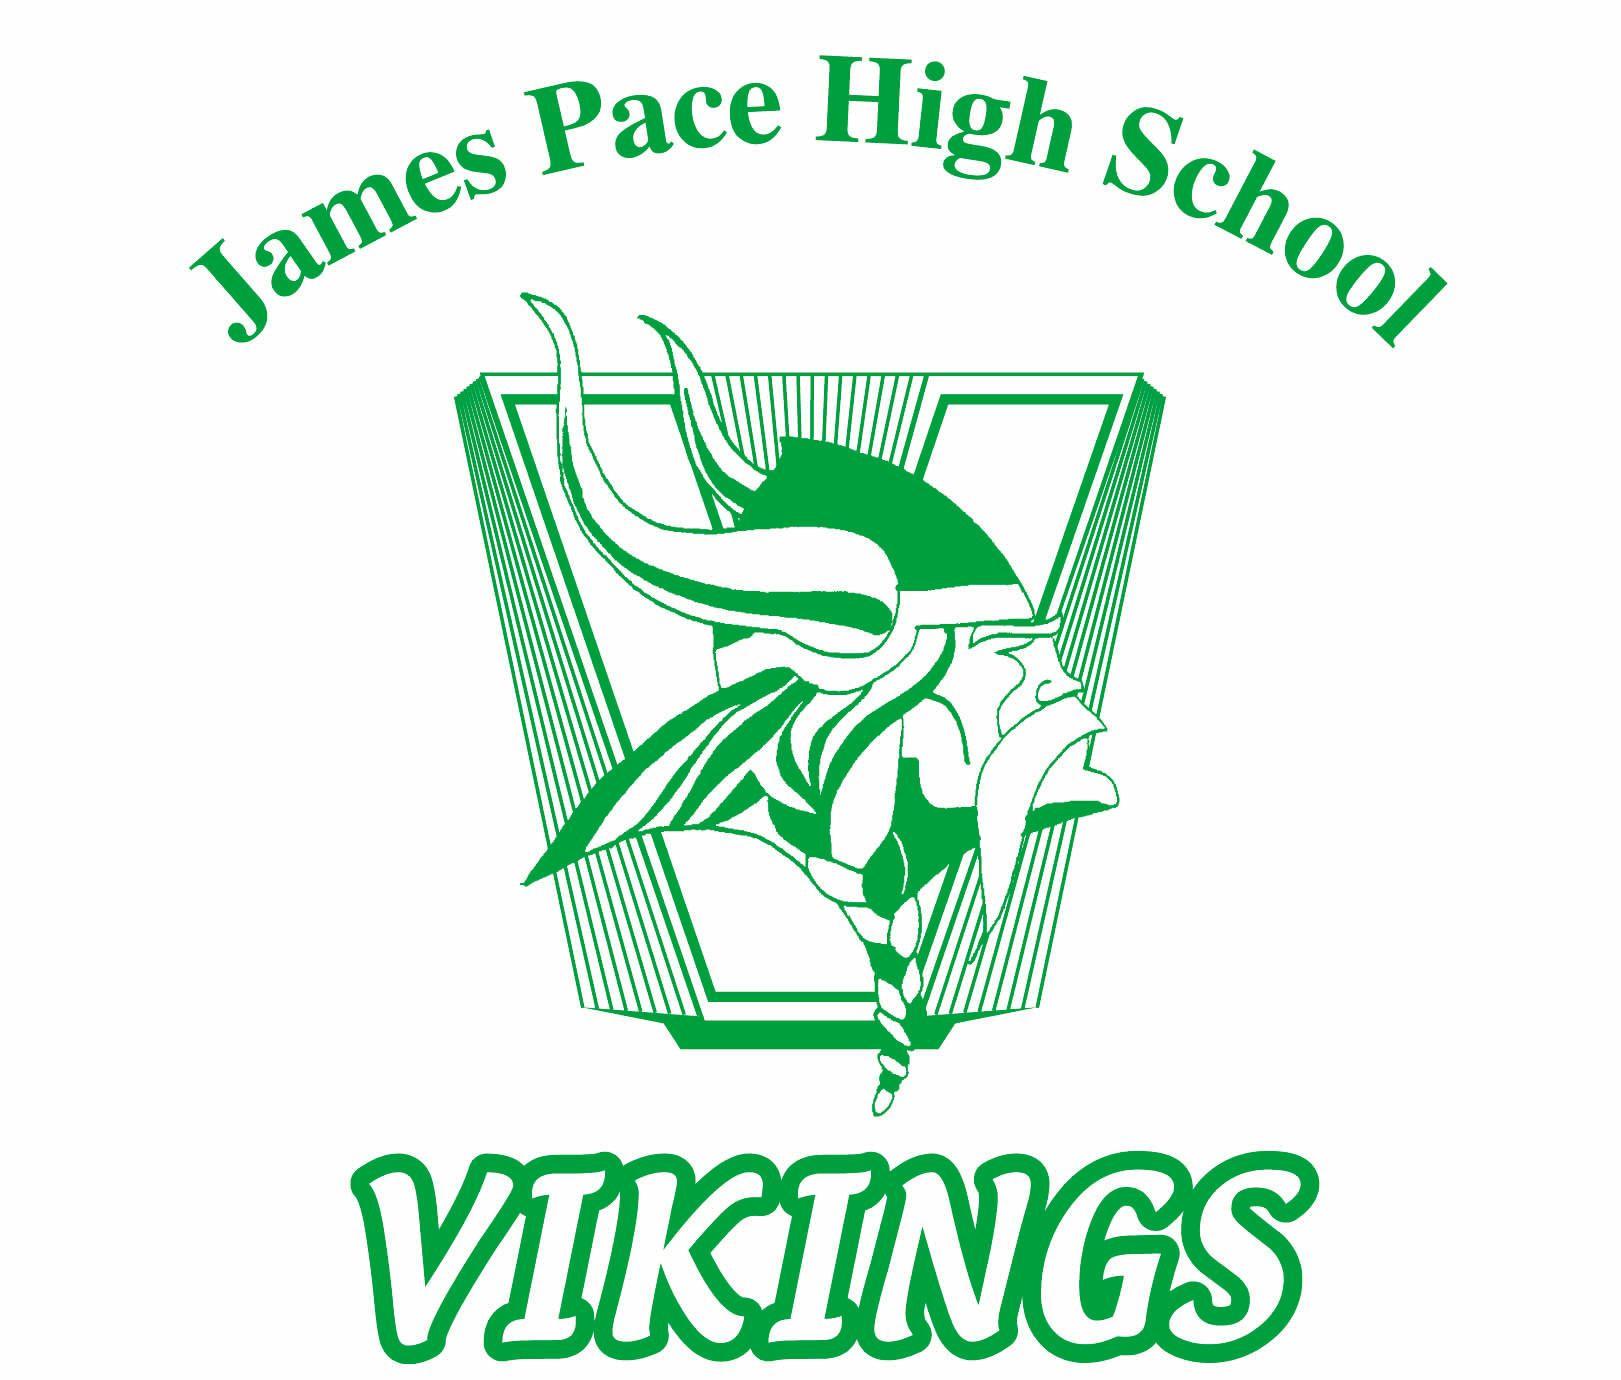 Green and Gold Viking Logo - The Pace Vikings